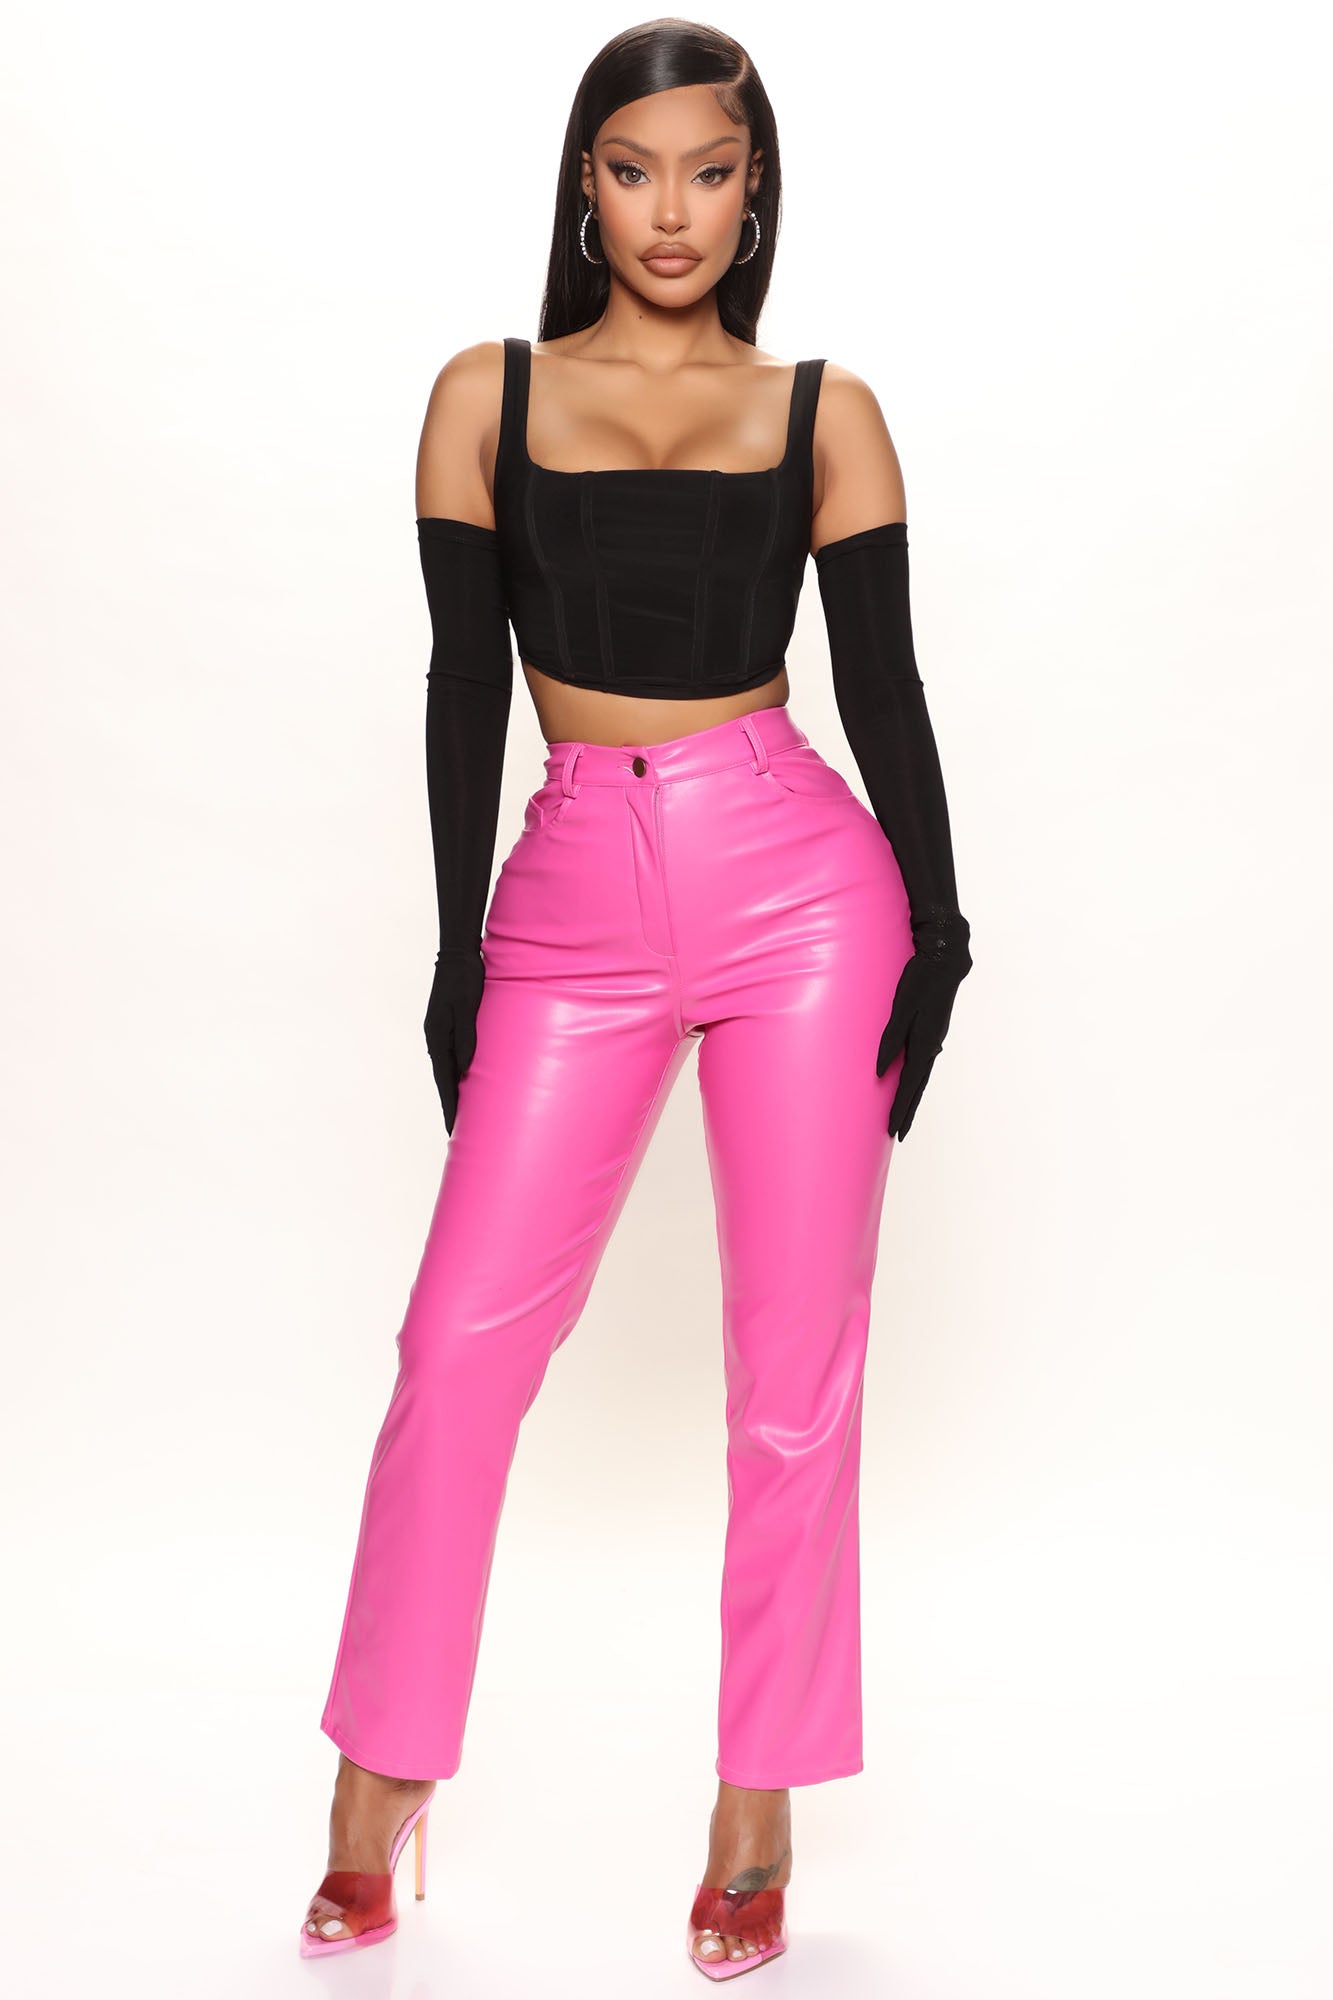 Melody Pants For Women Pink Patent Leather Leggings Button Fly Skinny Slim  Push Up Jeans Outdoor Trousers Winter Pants Women - Pants & Capris -  AliExpress